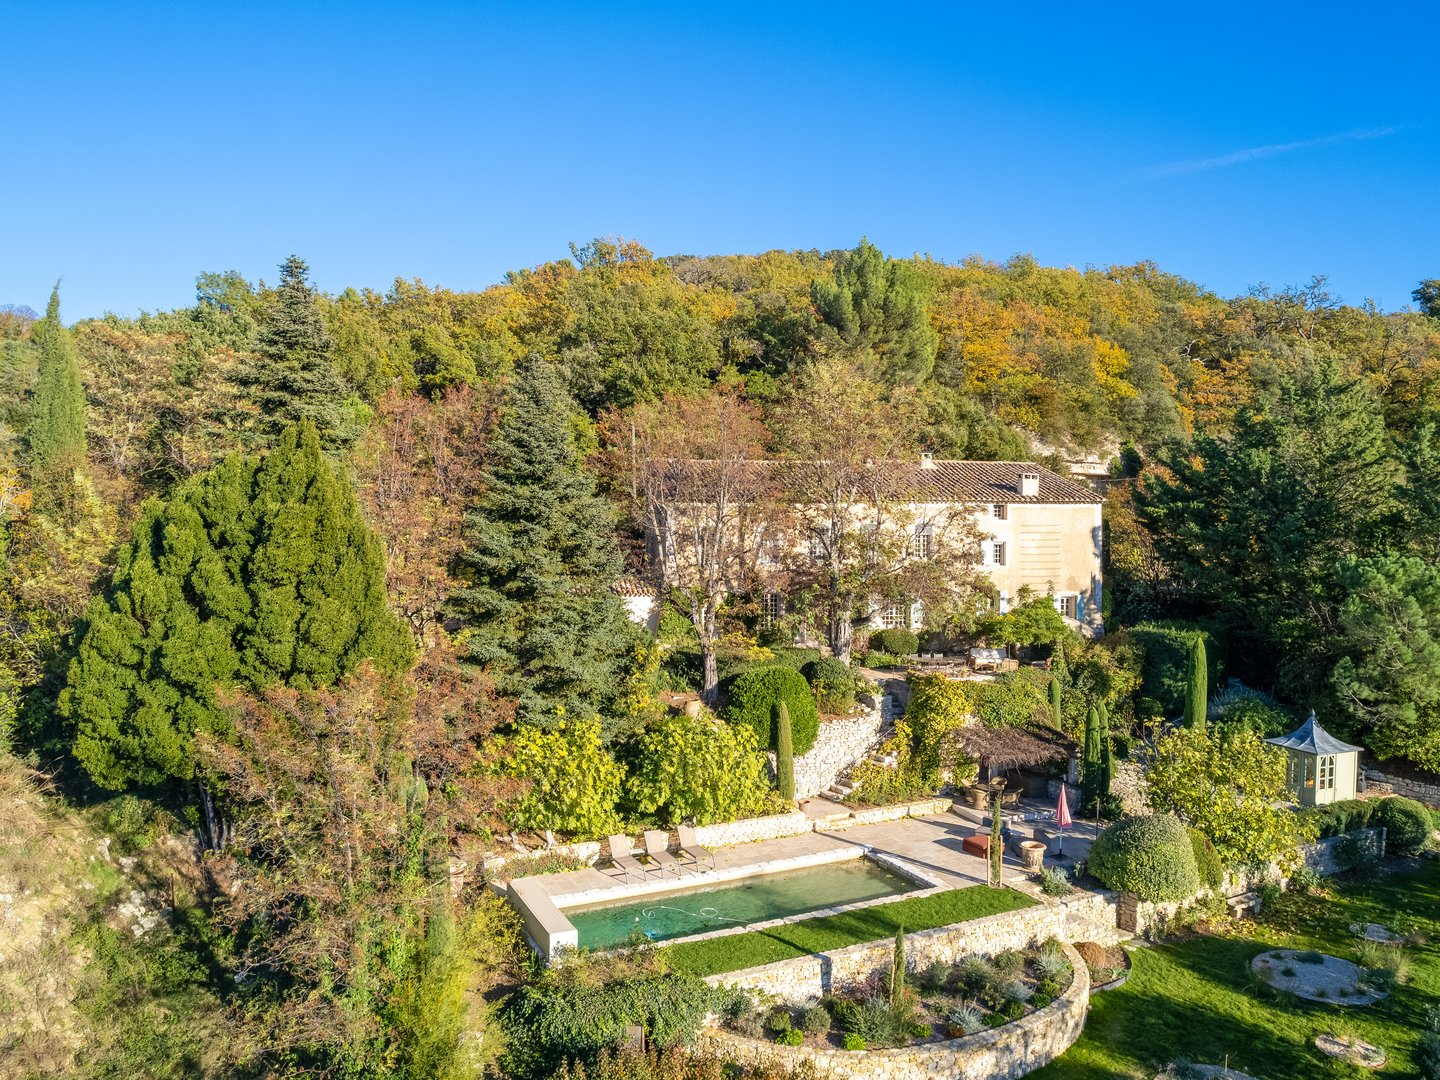 18th century Bastide with views of Luberon for sale - Bonnieux - 60